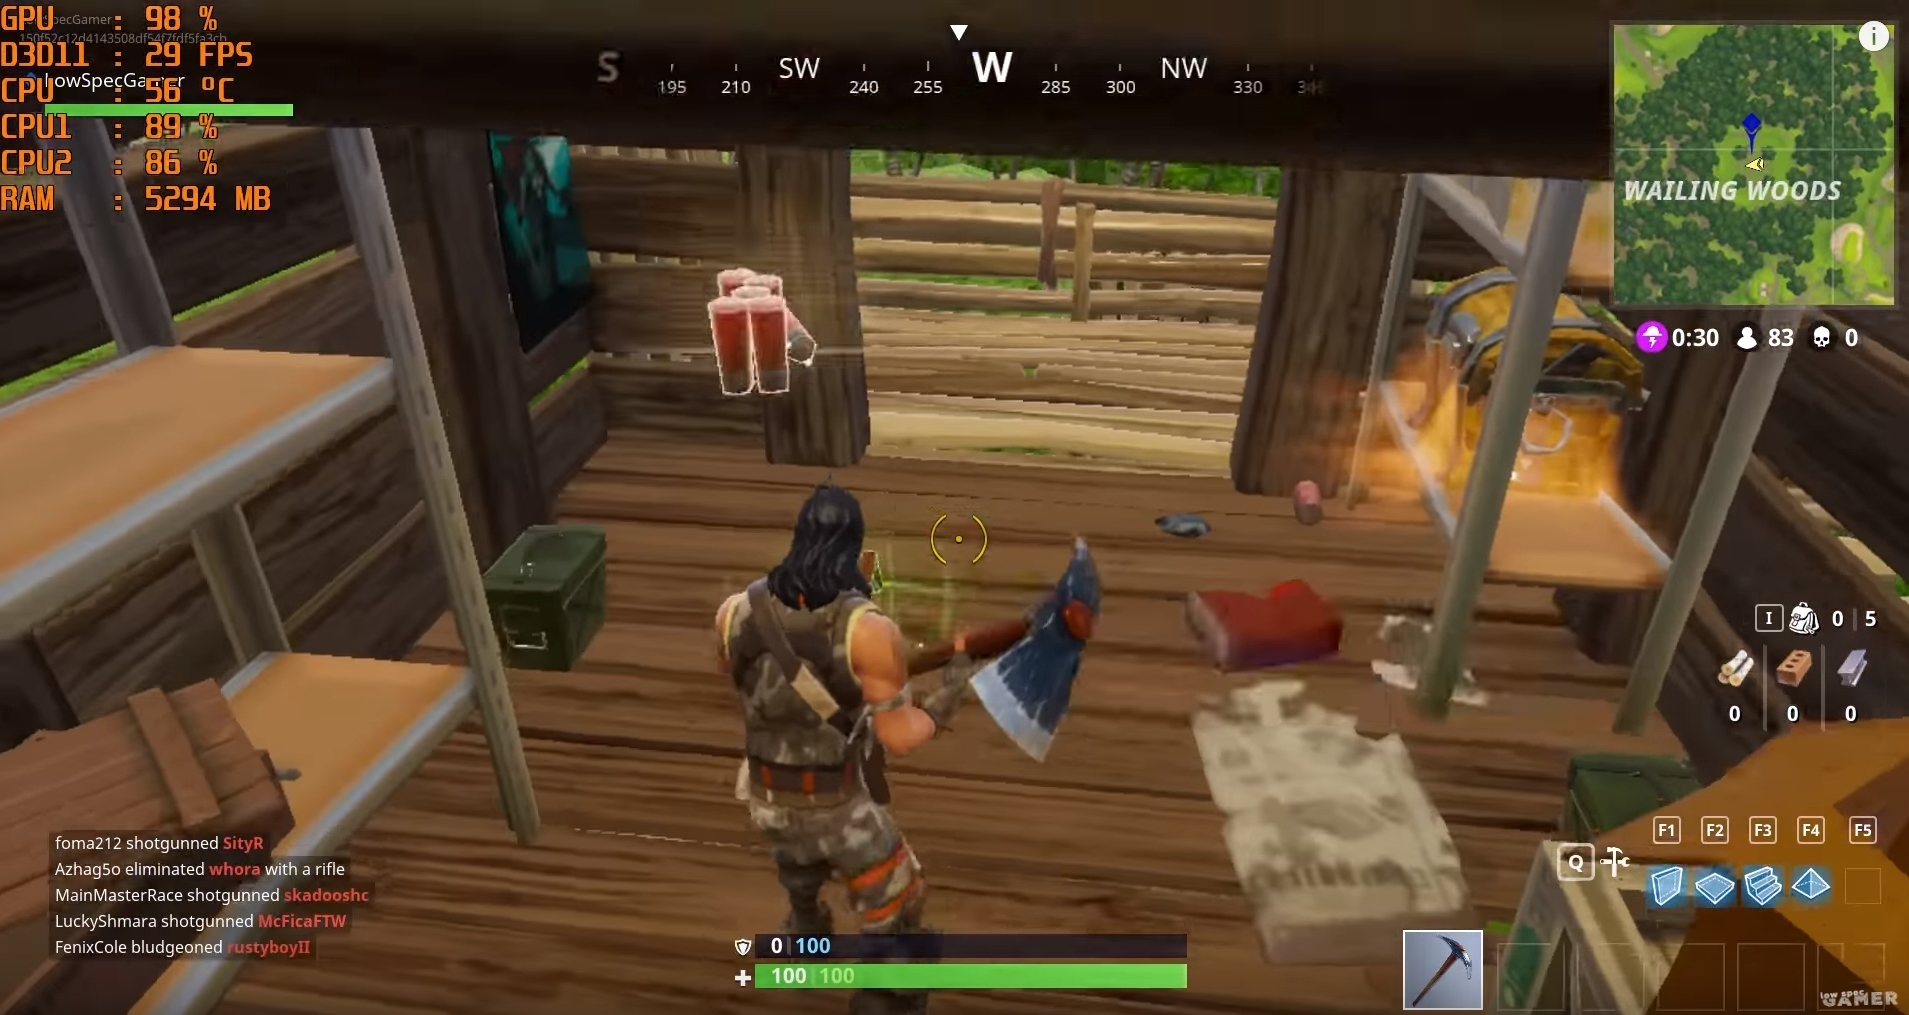 Is Fortnite Better For Mac With Storage?